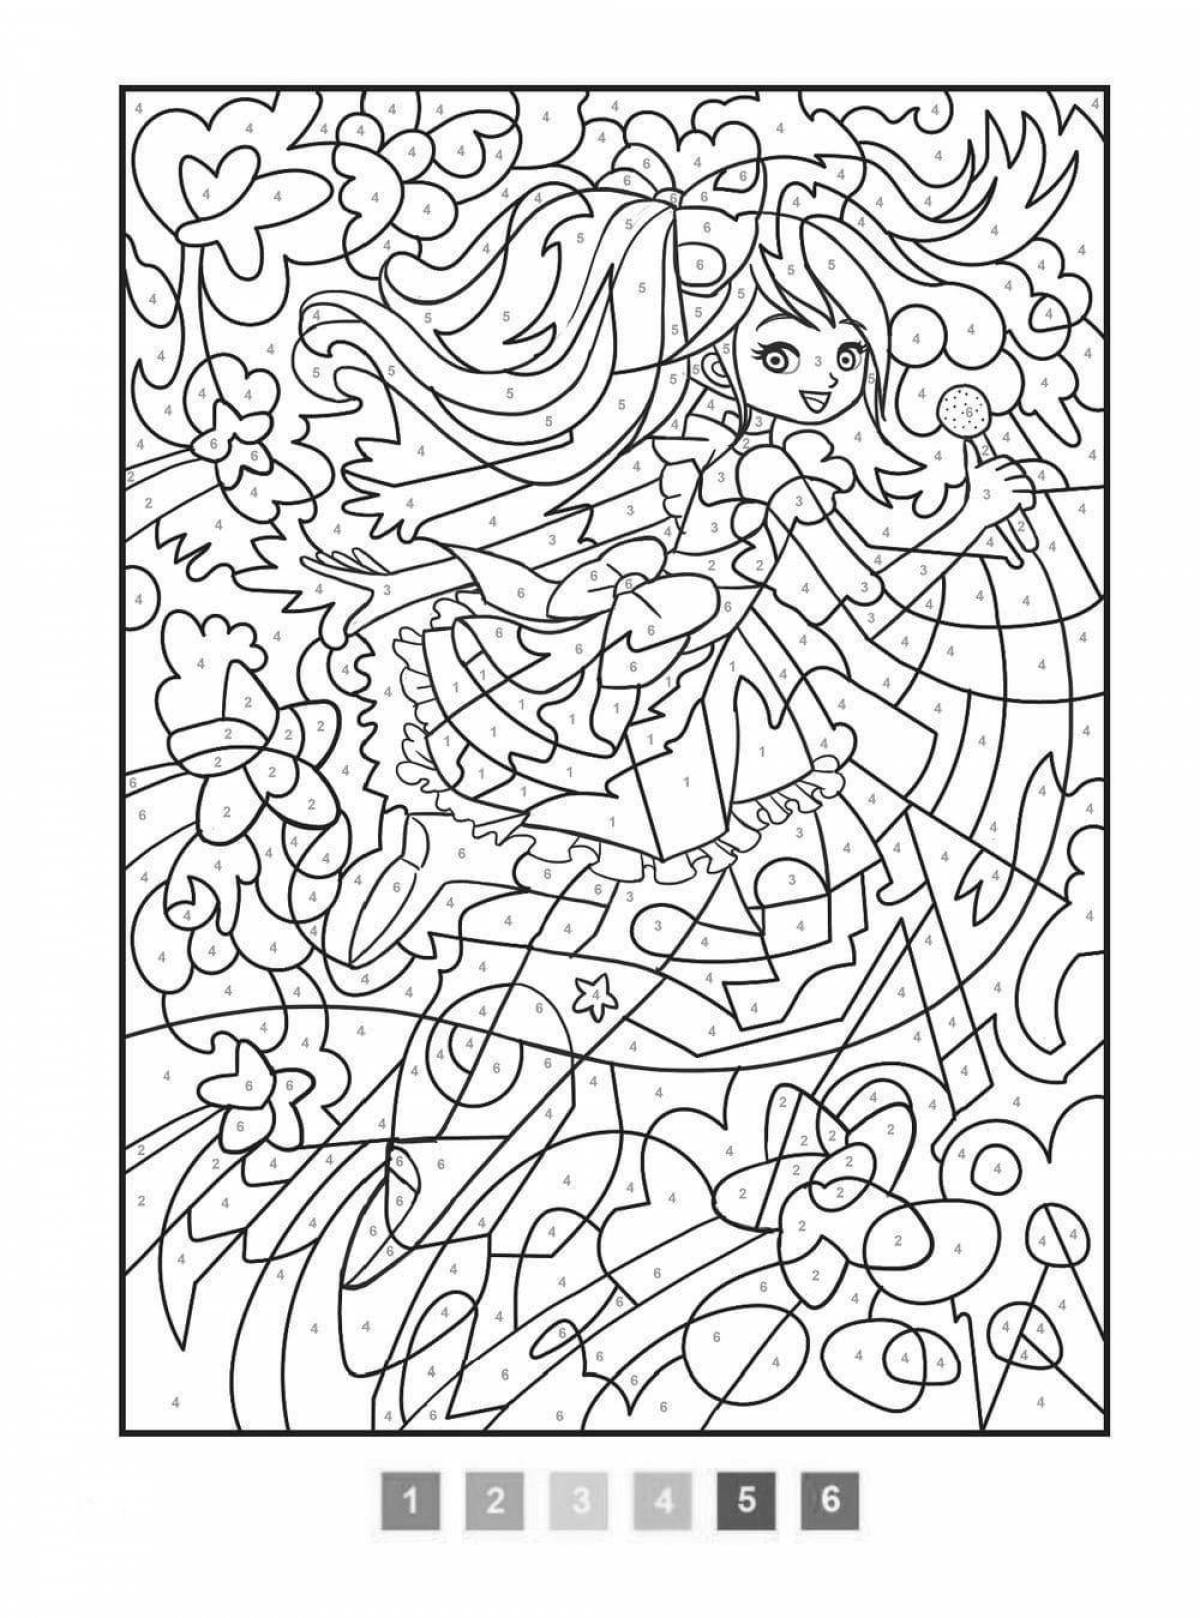 Exciting coloring by phone numbers